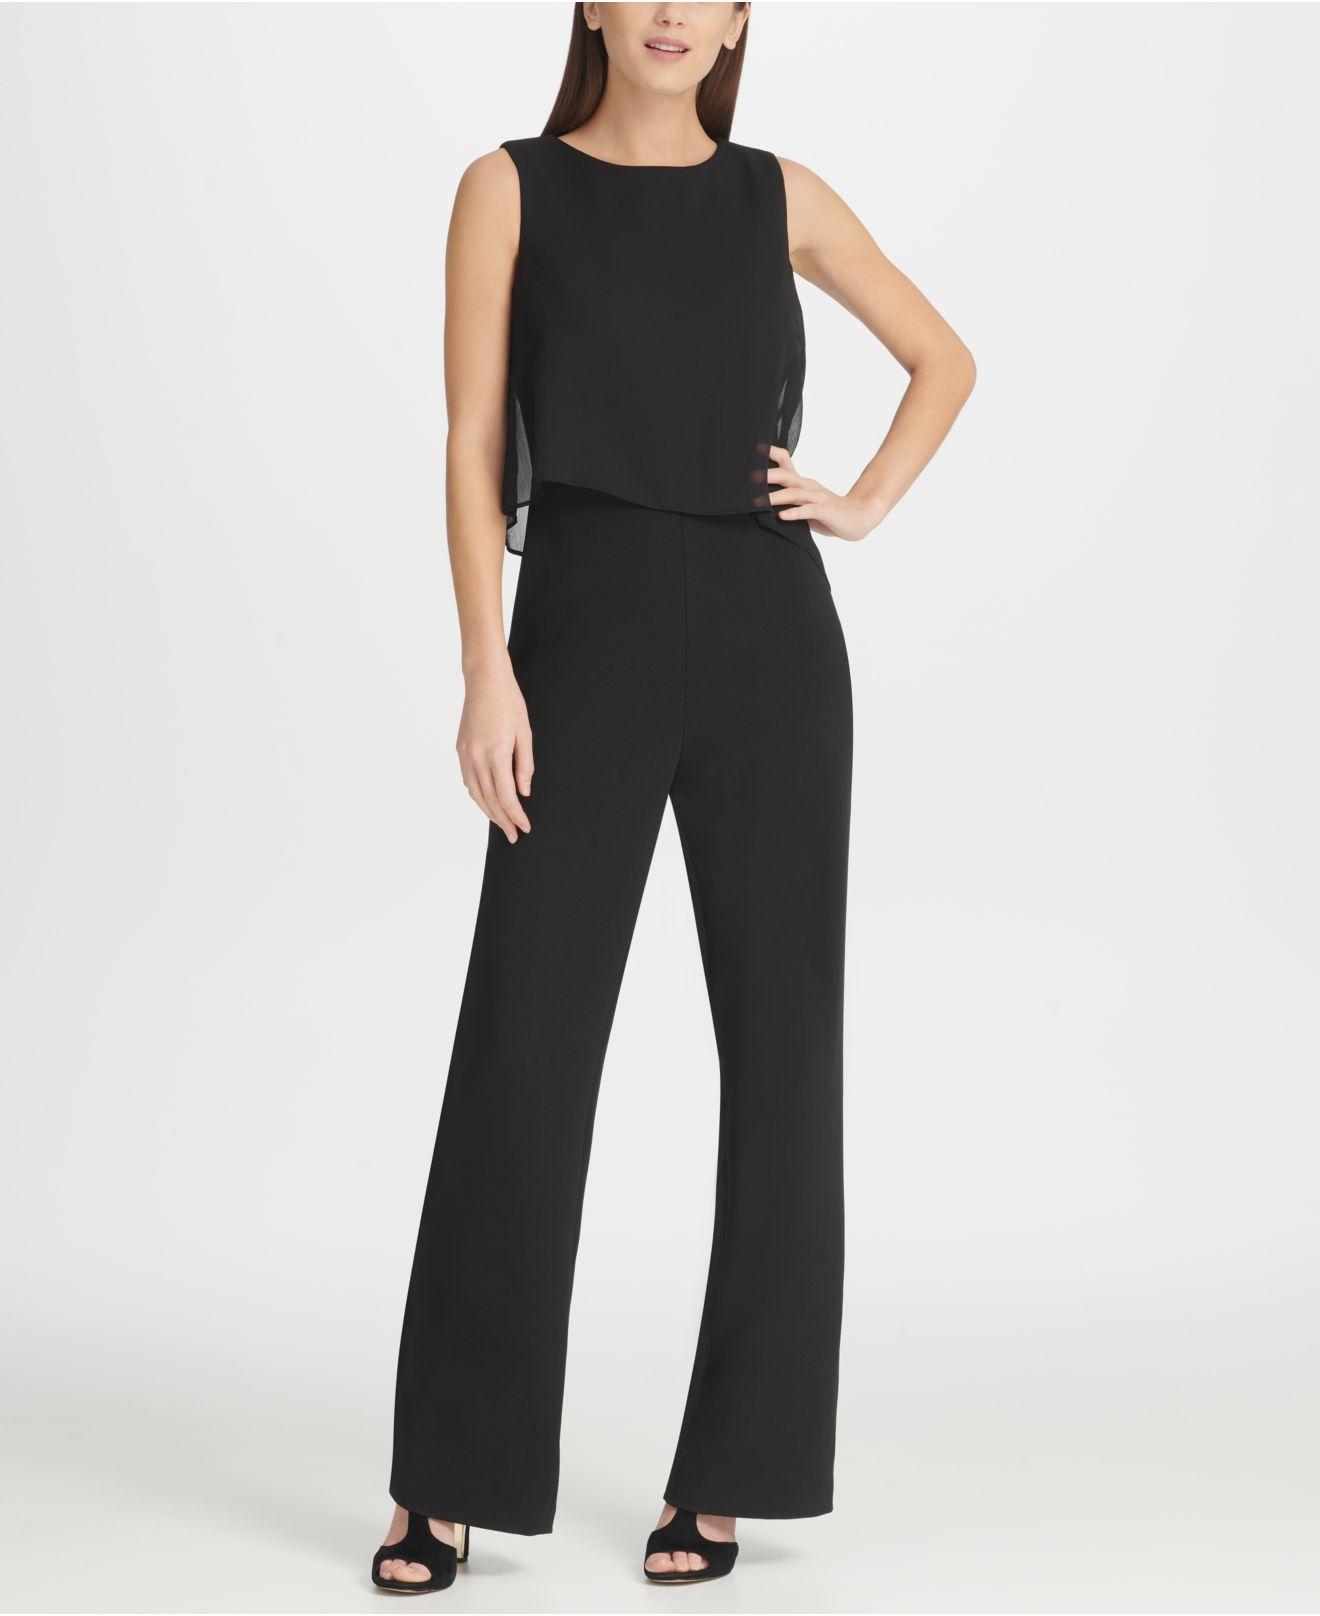 Panorama Pastoor Lagere school DKNY Chiffon Overlay Jumpsuit in Black | Lyst